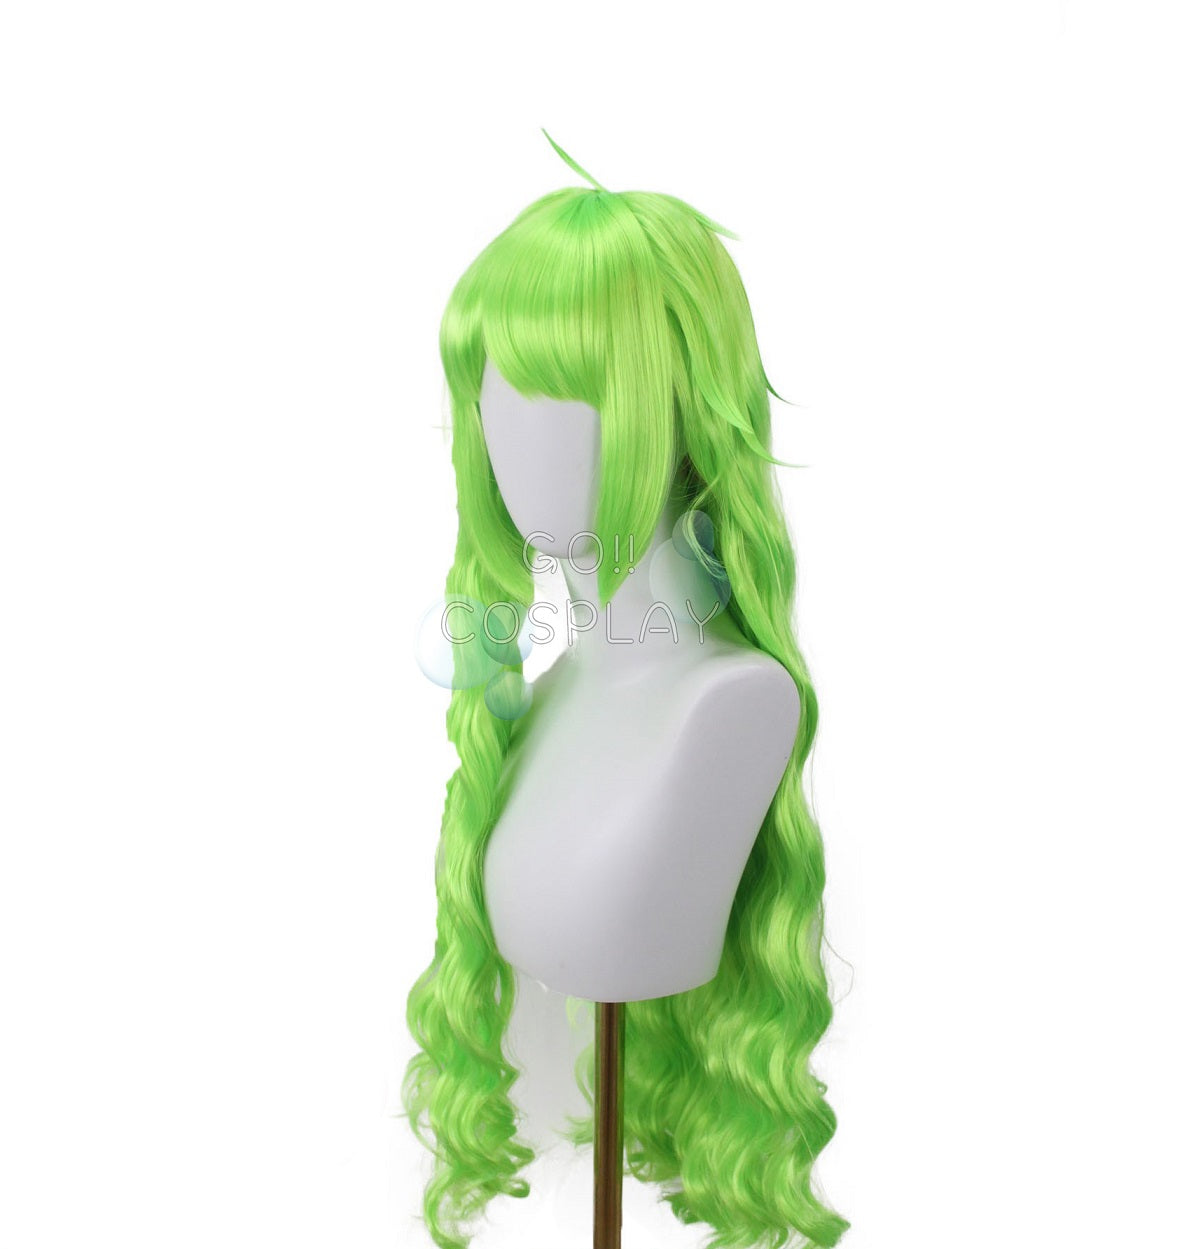 Monet One Piece Cosplay Wig for Sale